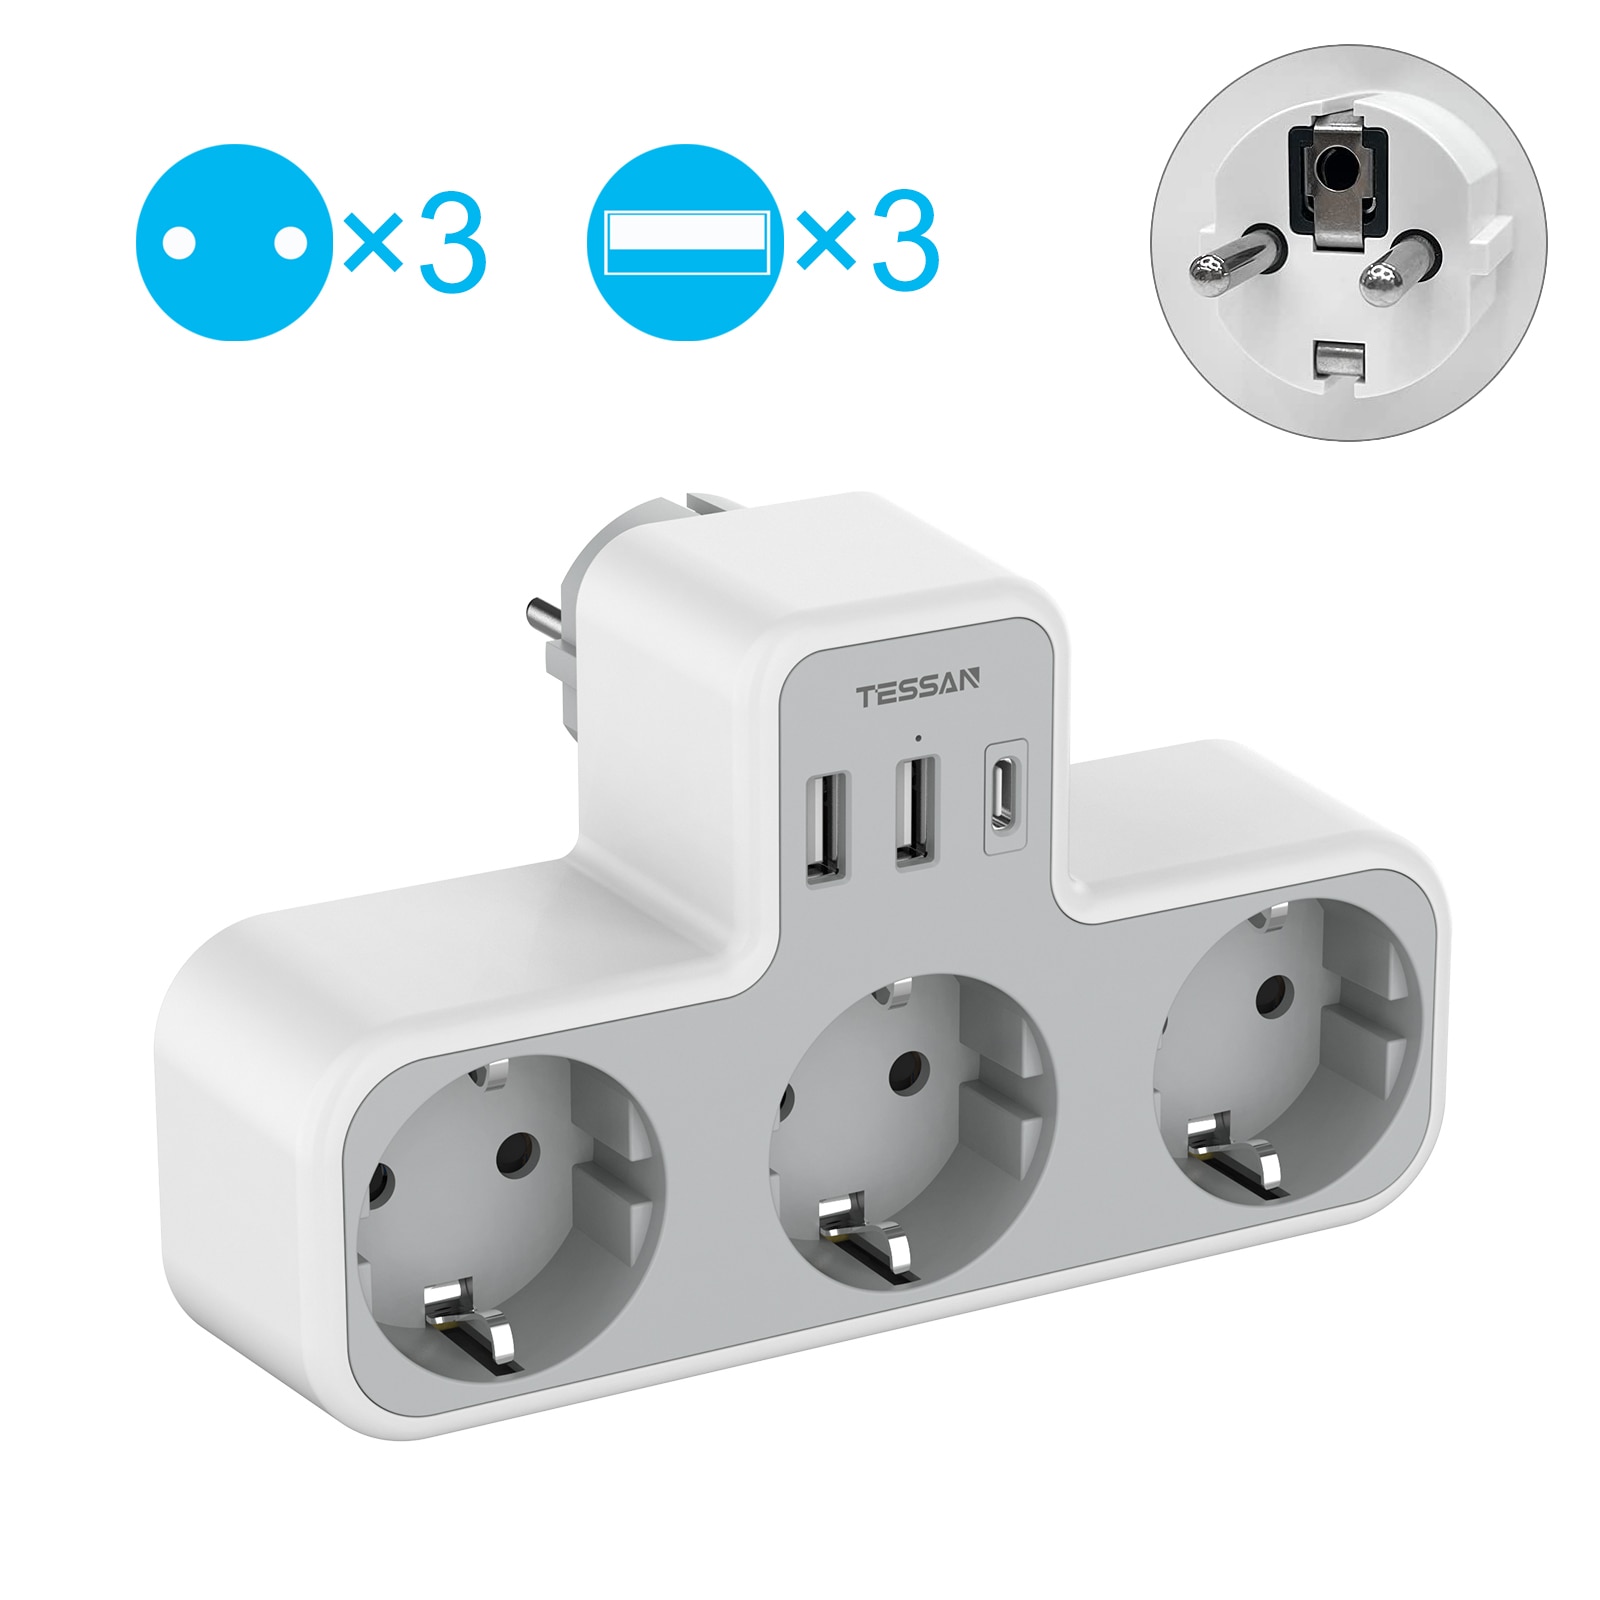 TESSAN EU Wall Socket Extender with 3 AC Outlets and 3 USB Ports 5V 2.4A Power Adapter Overload Protection for Home/Office